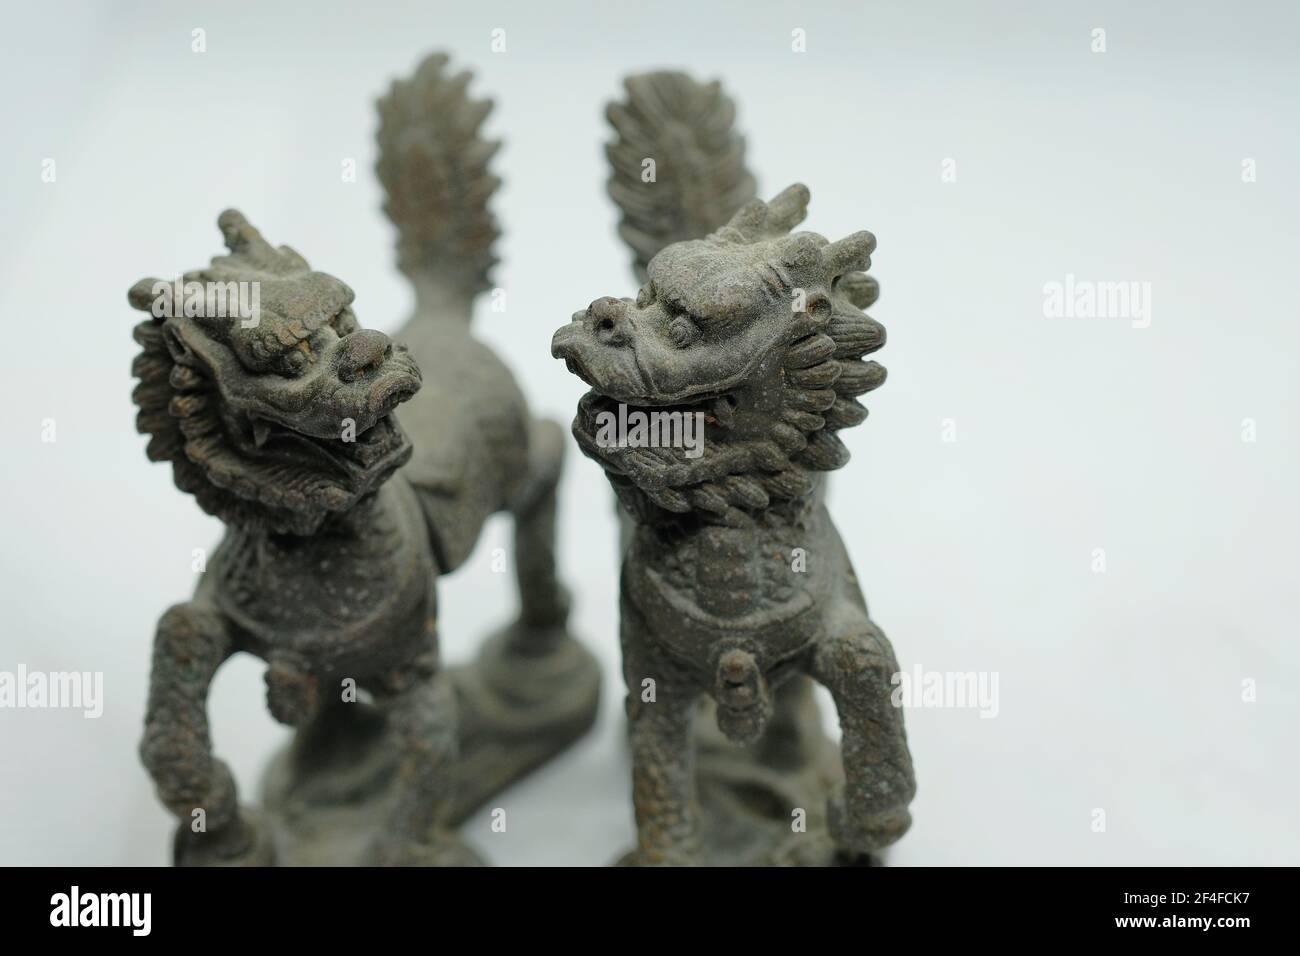 A pair of mythical Chinese bronze Qilin figurines, with head of a dragon, antlers of a deer, skin and scales of a fish, hooves of an ox & lion's tail Stock Photo